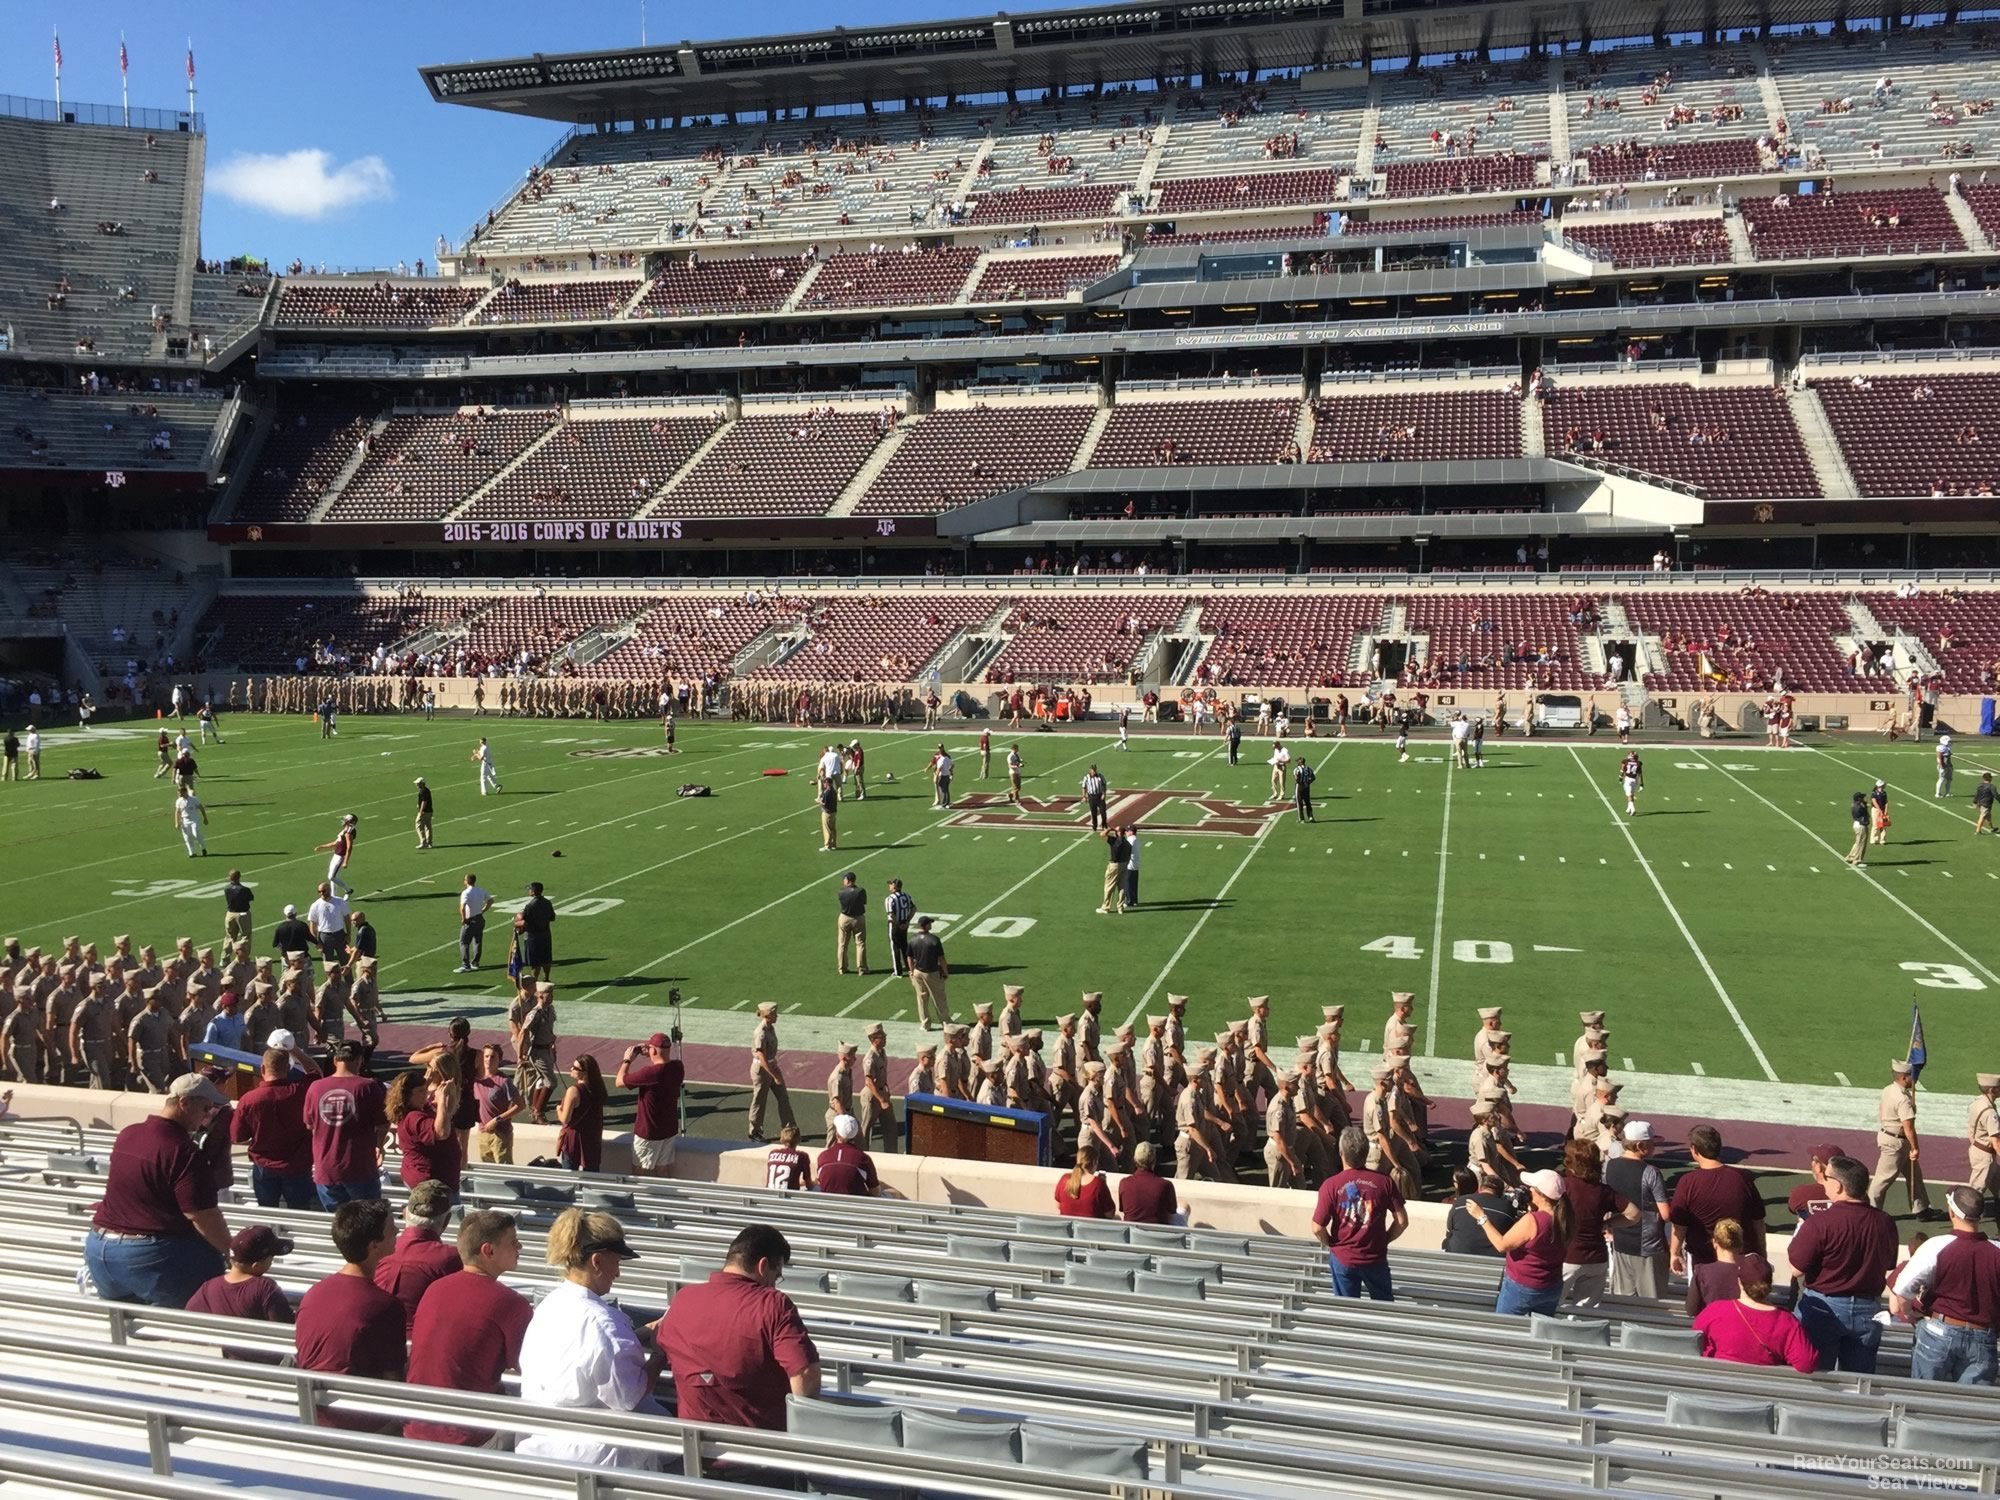 section 125, row 20 seat view  - kyle field